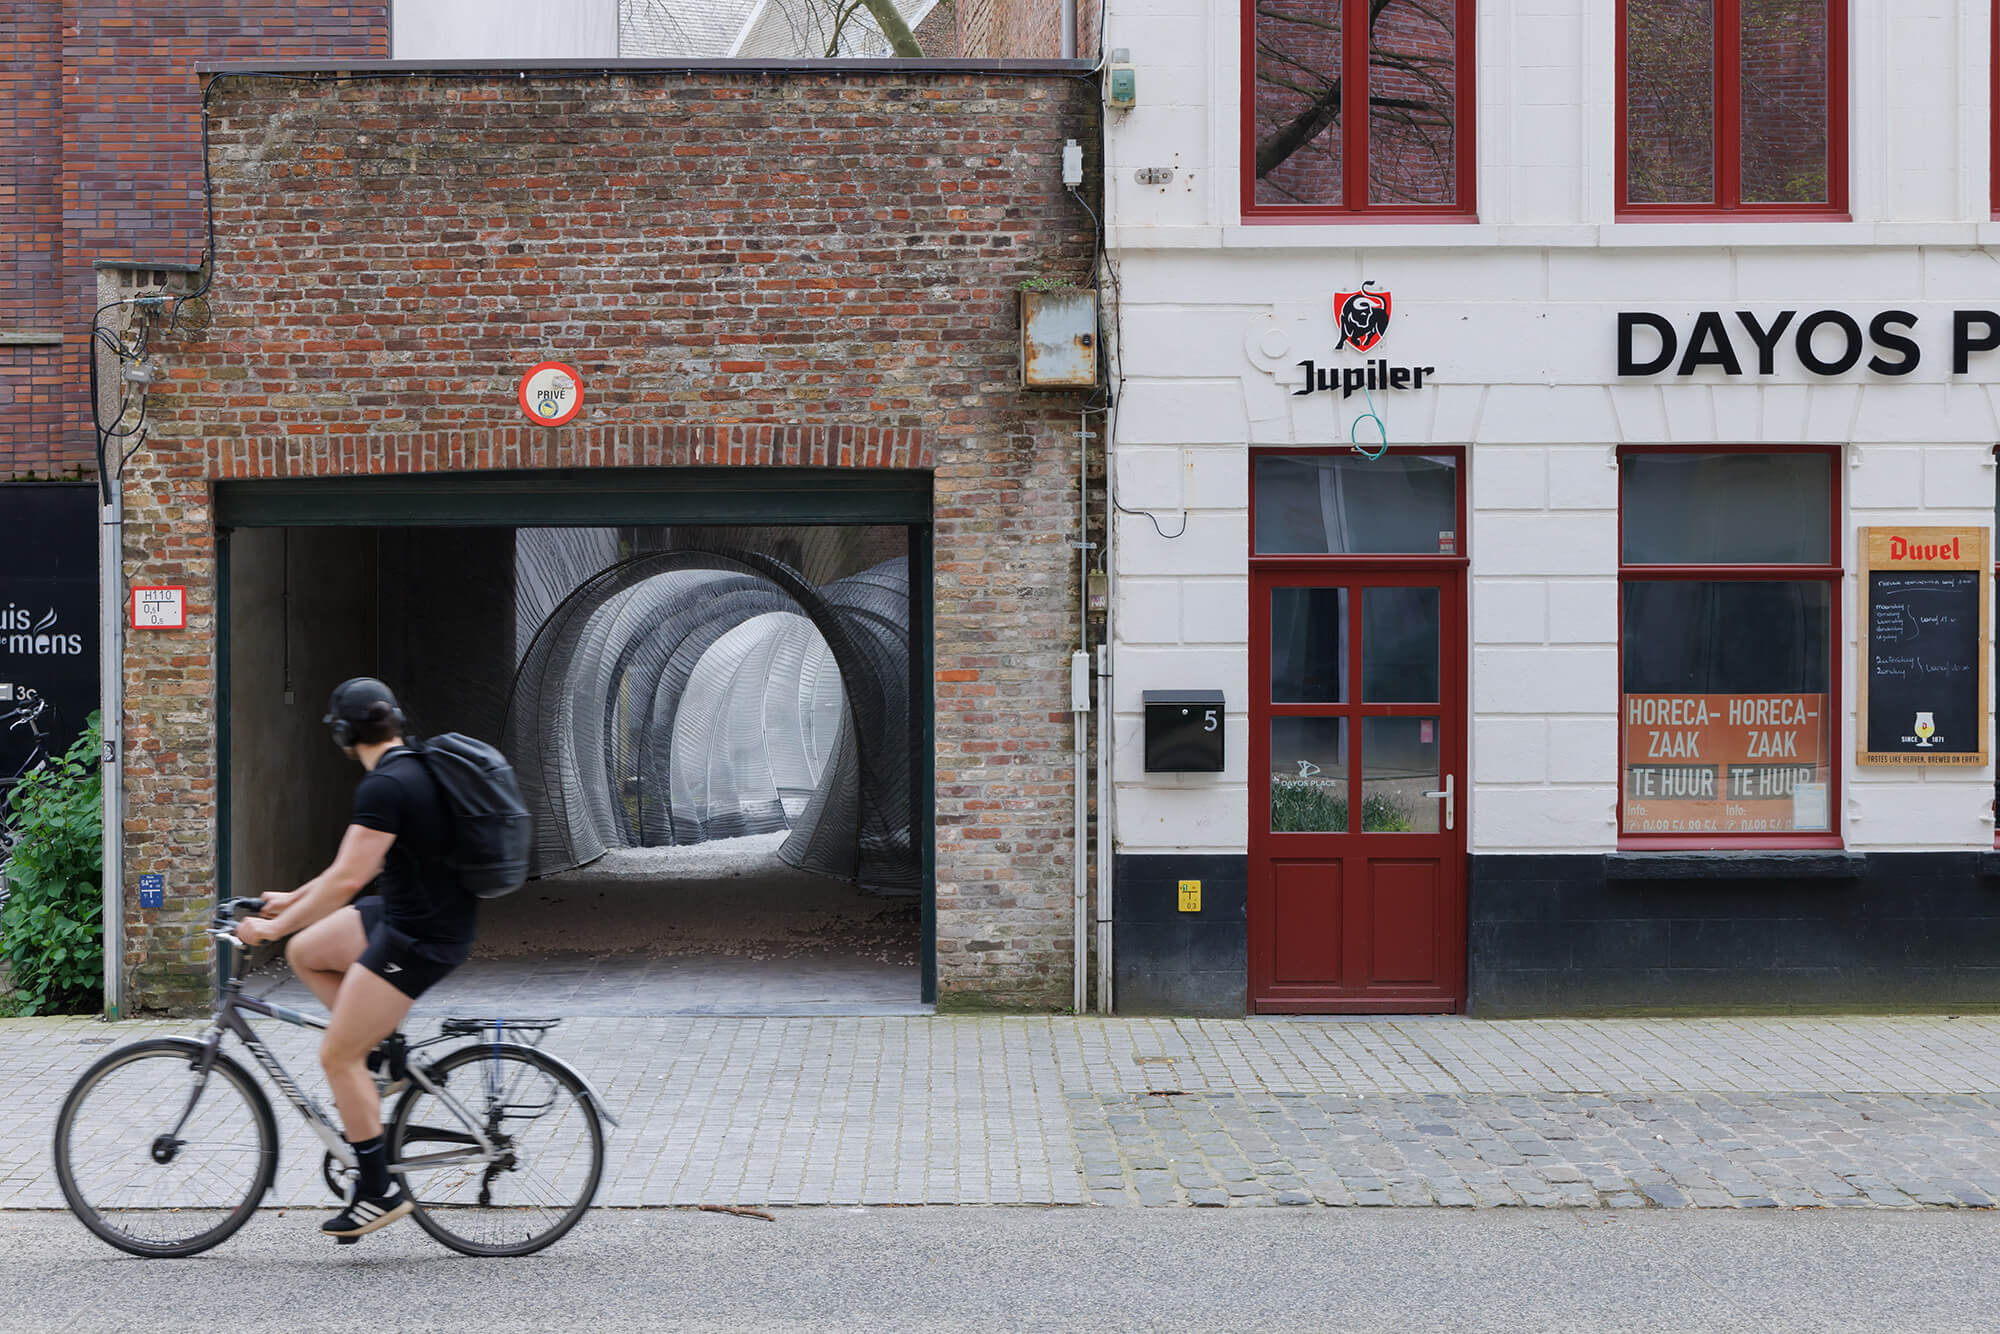 street with view looking into garage and installation for Bruges Triennial 